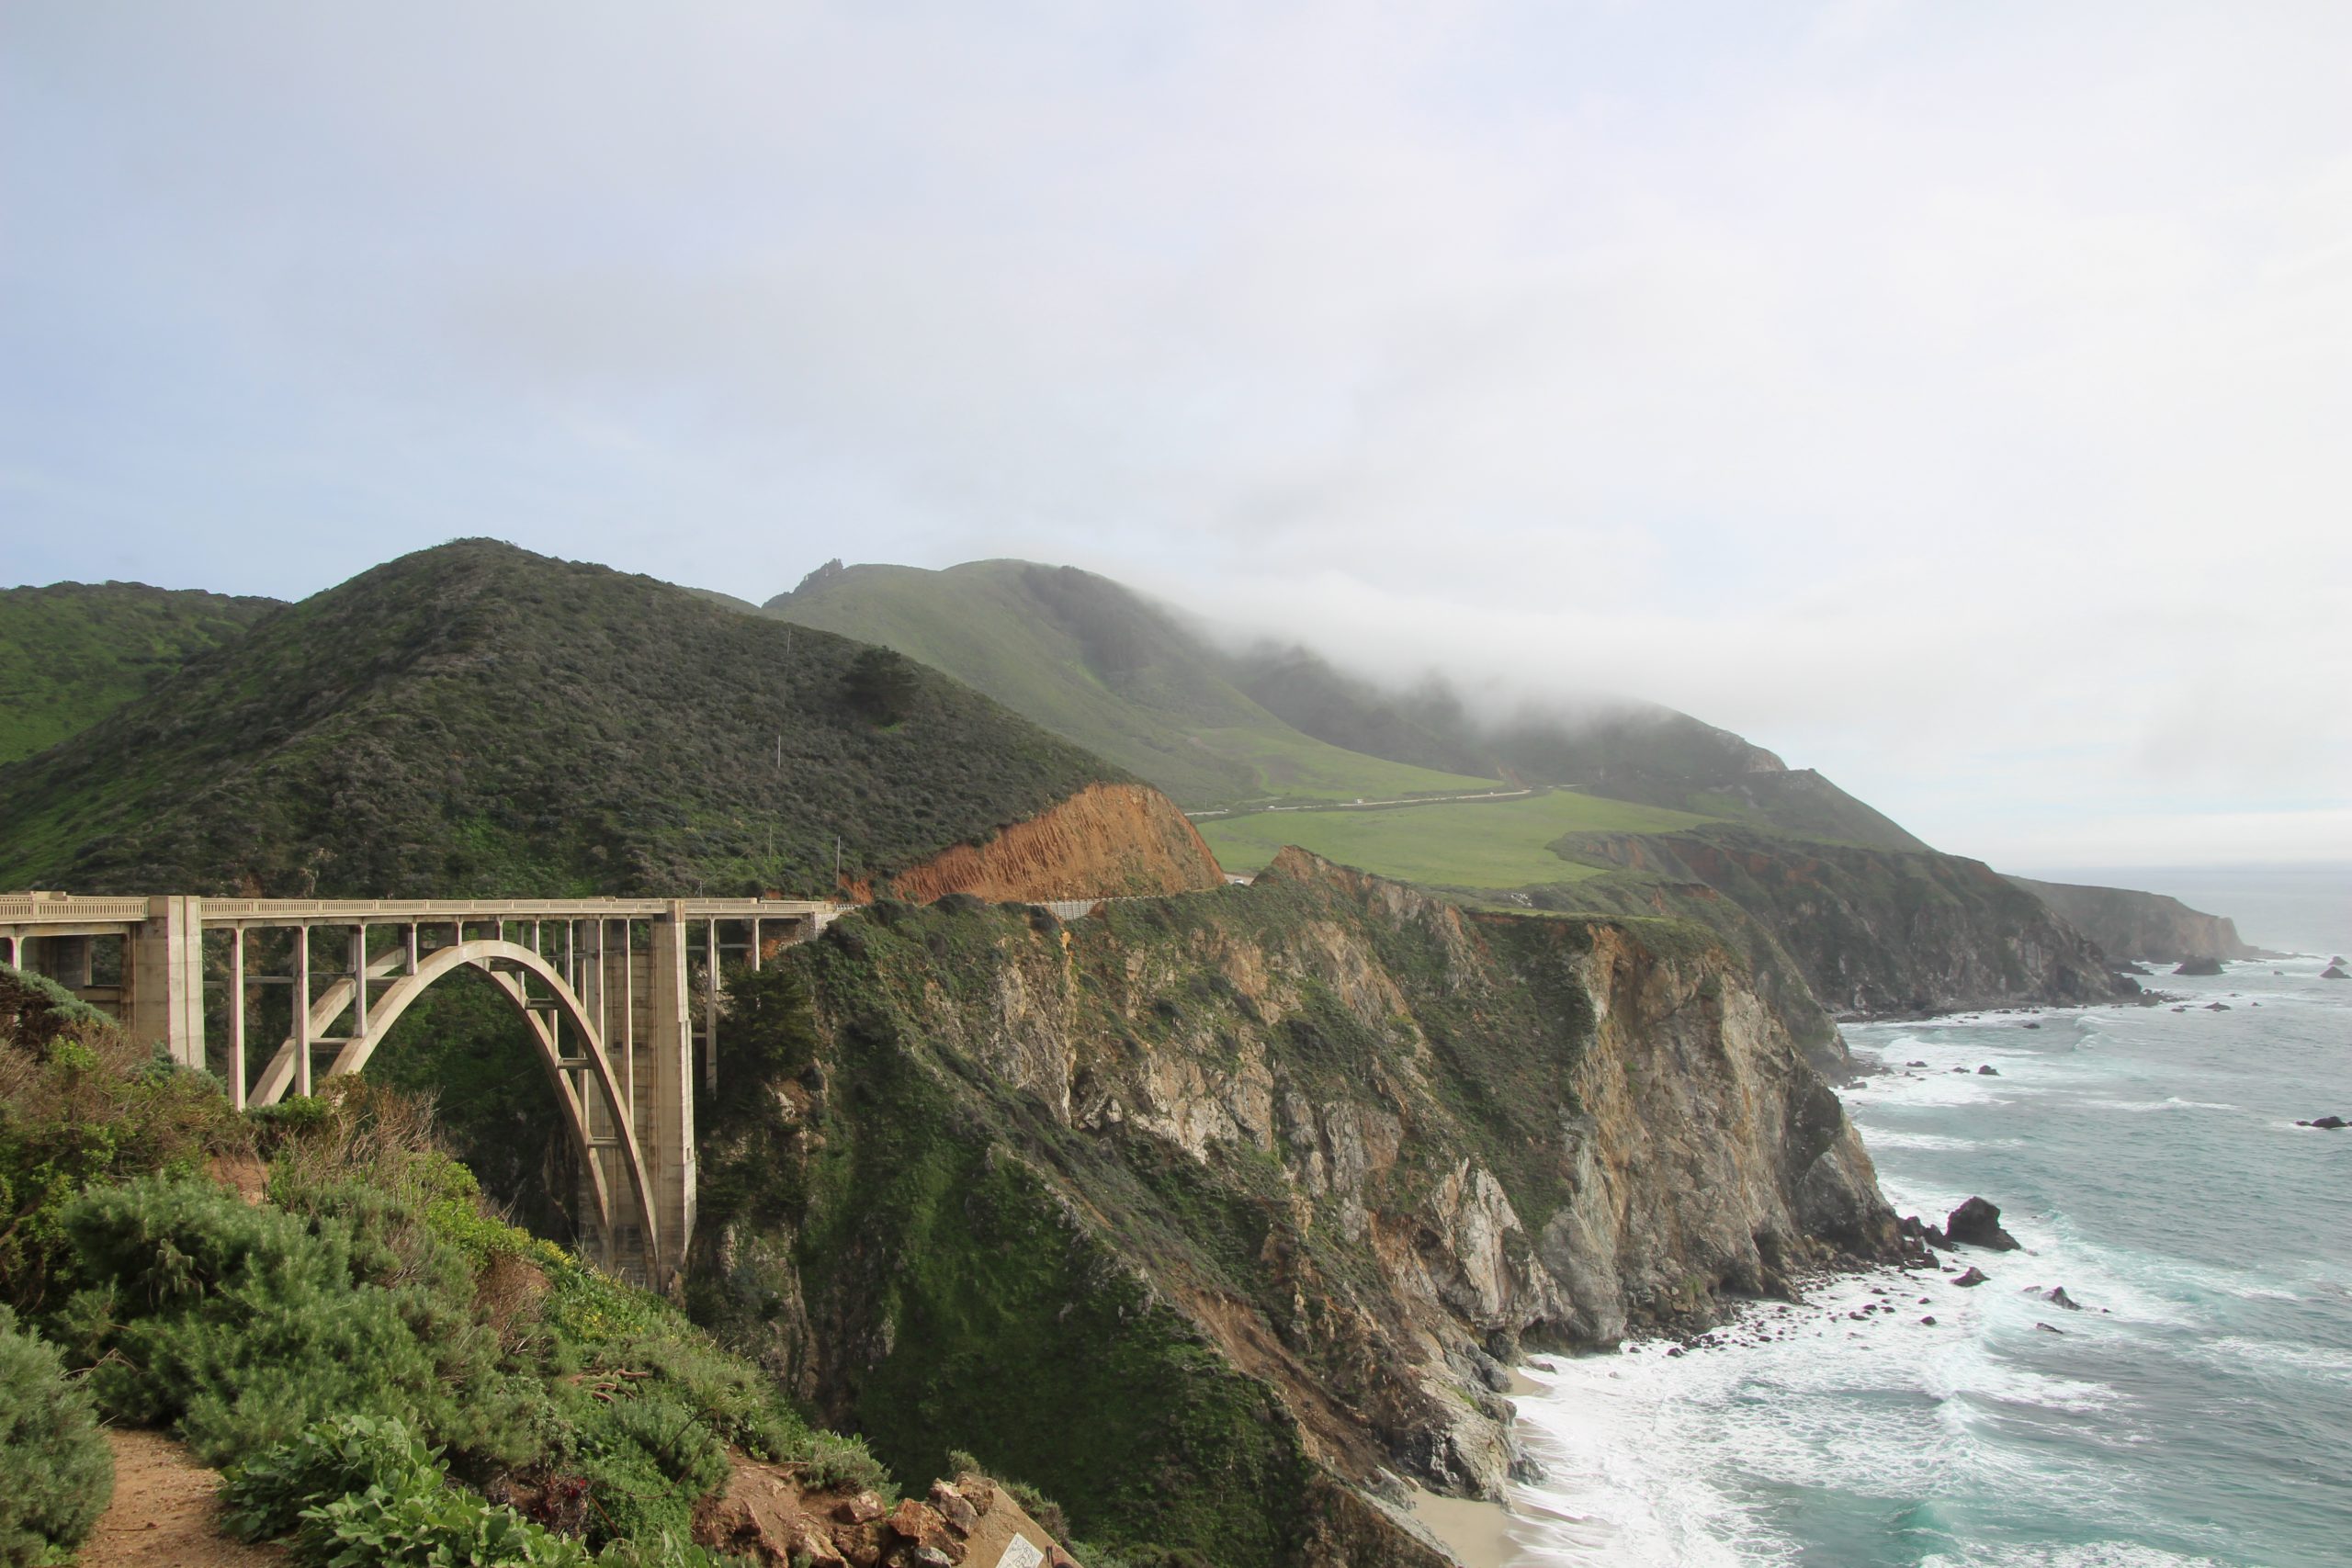 Road Trip Along California’s Highway One